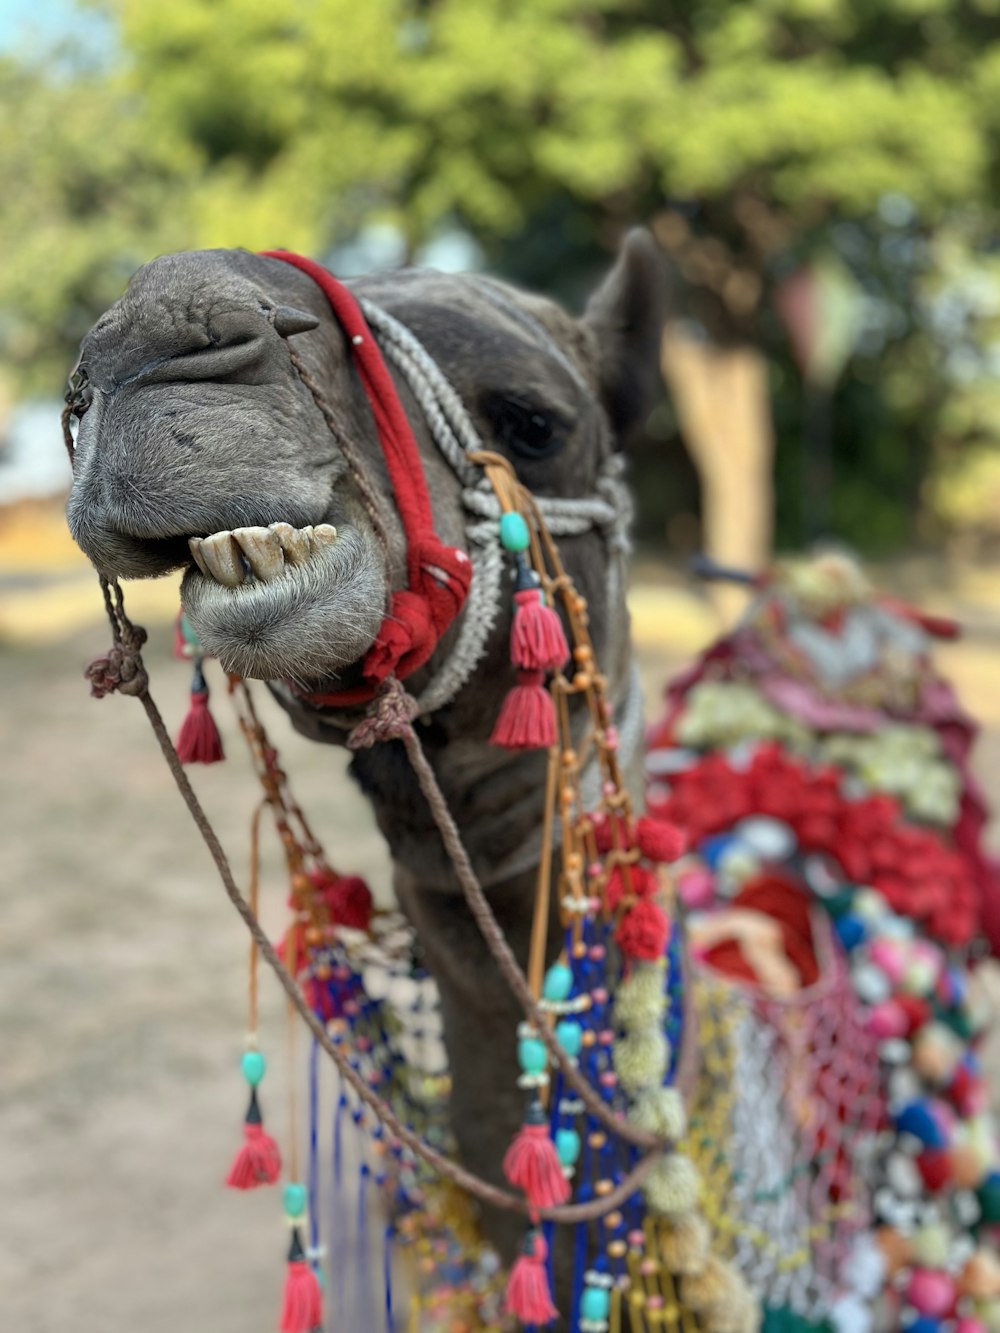 a close up of a camel with a chain around its neck